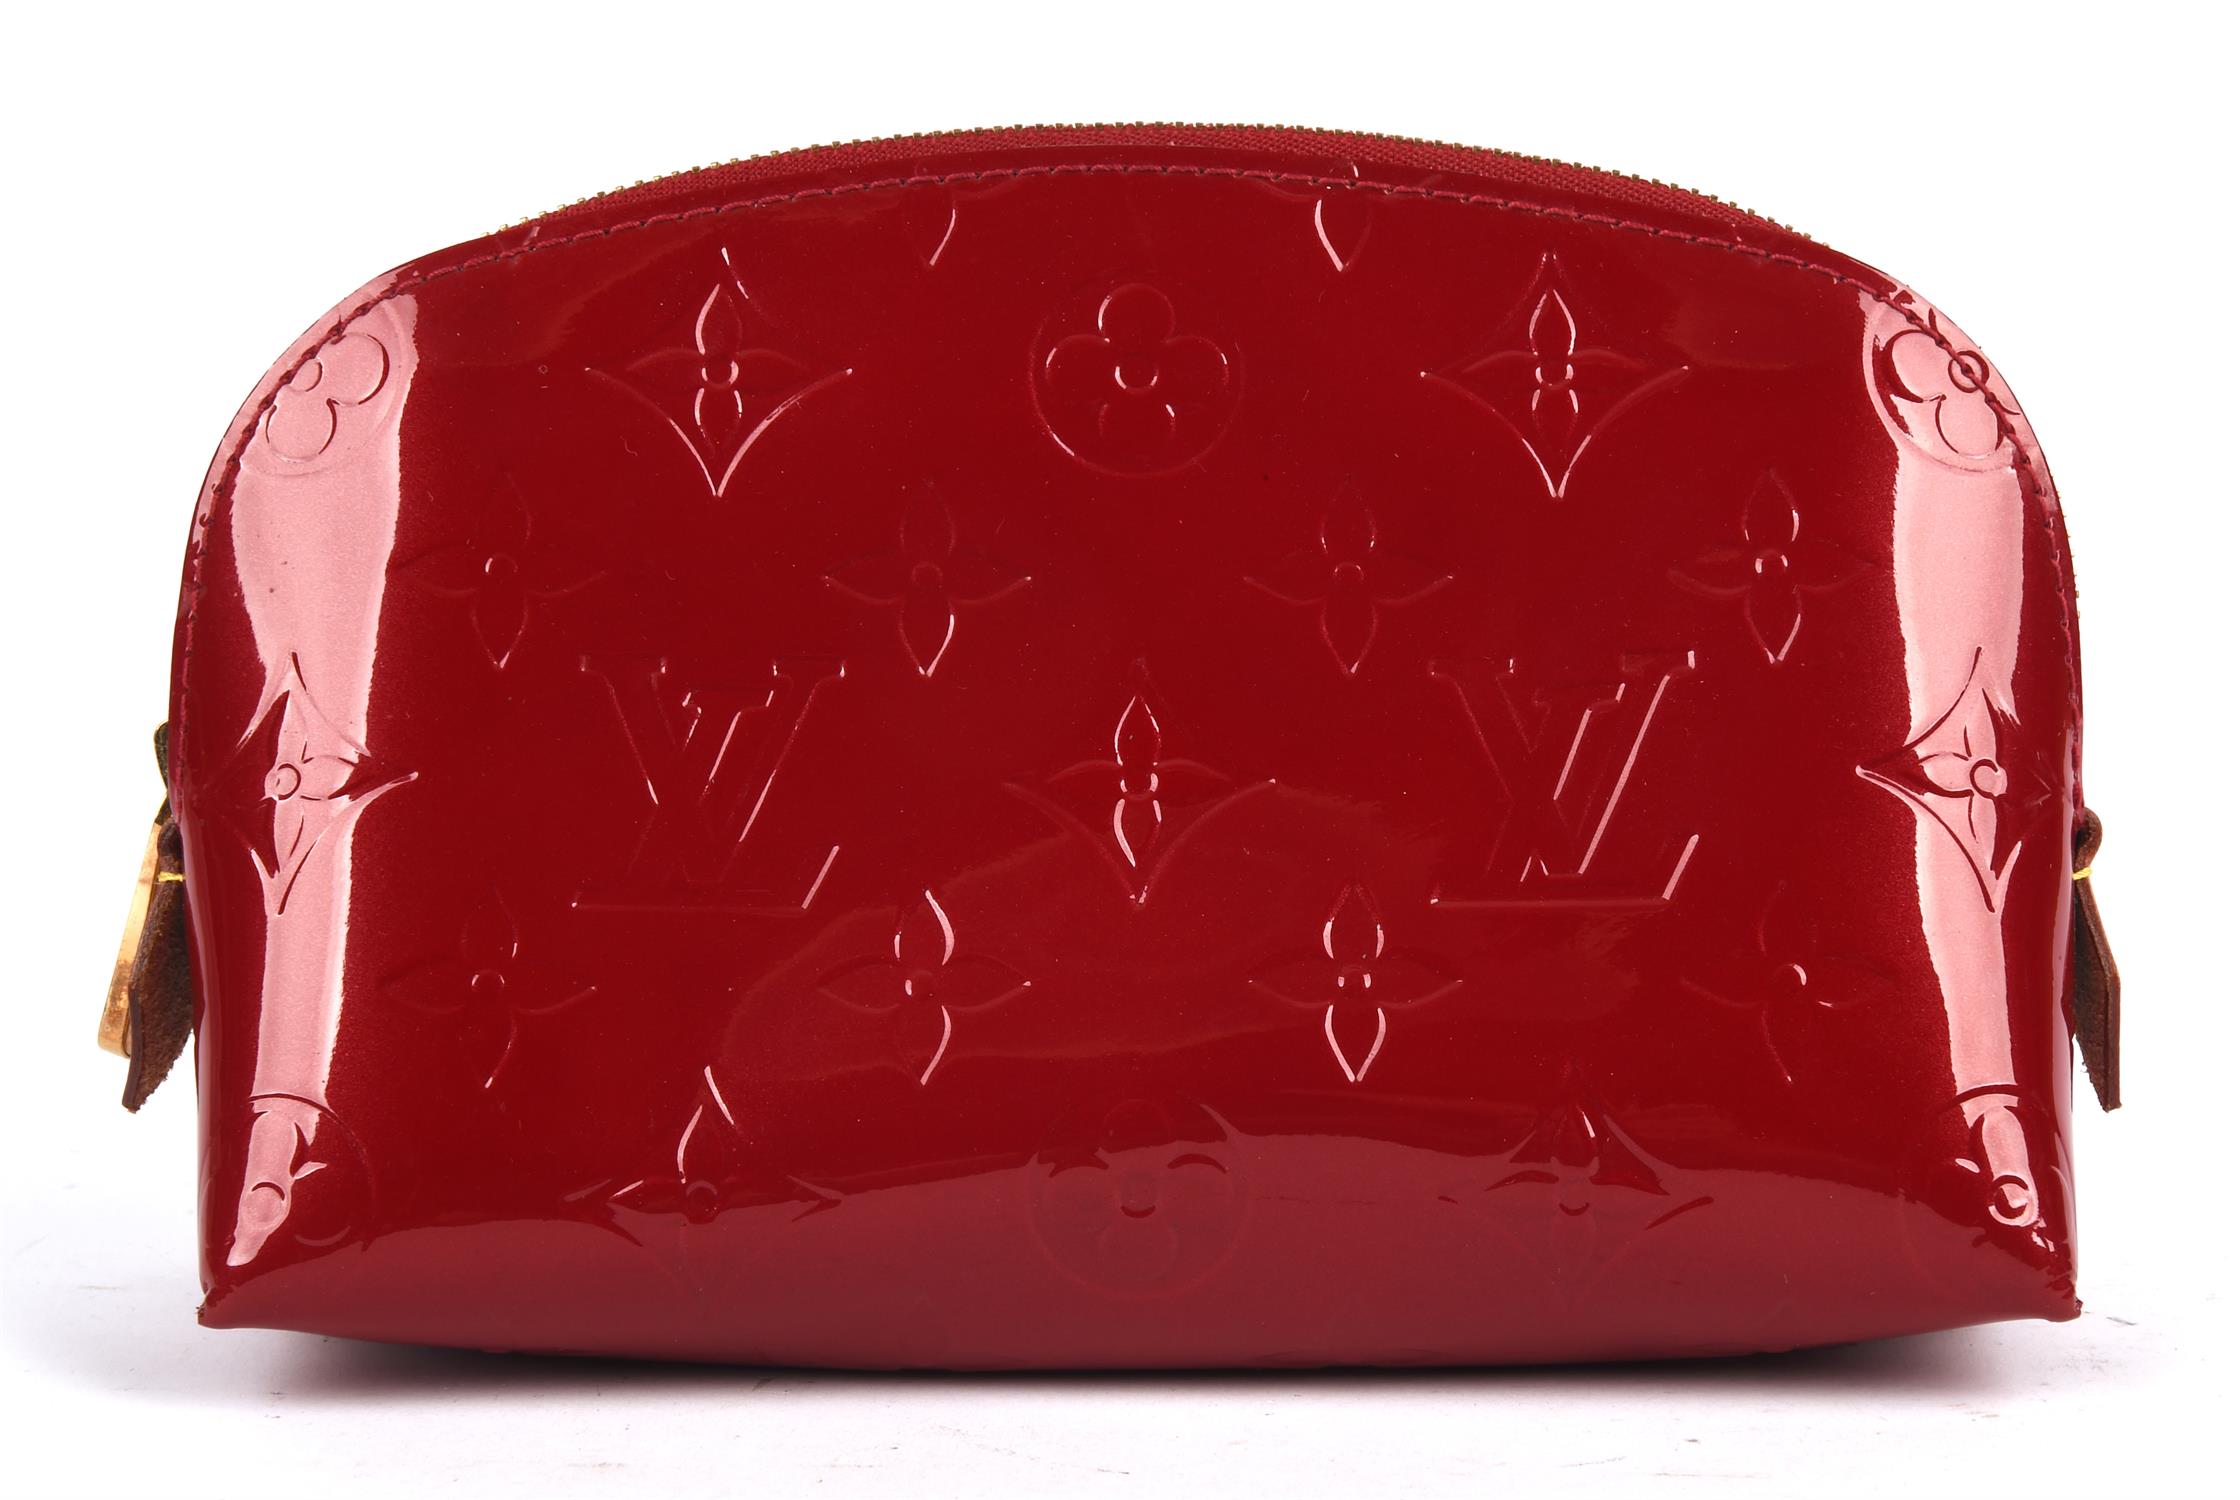 LOUIS VUITTON lipstick red varnished Vernis calf leather make-up bag with dust cloth (17cm x 13cm x - Image 2 of 6